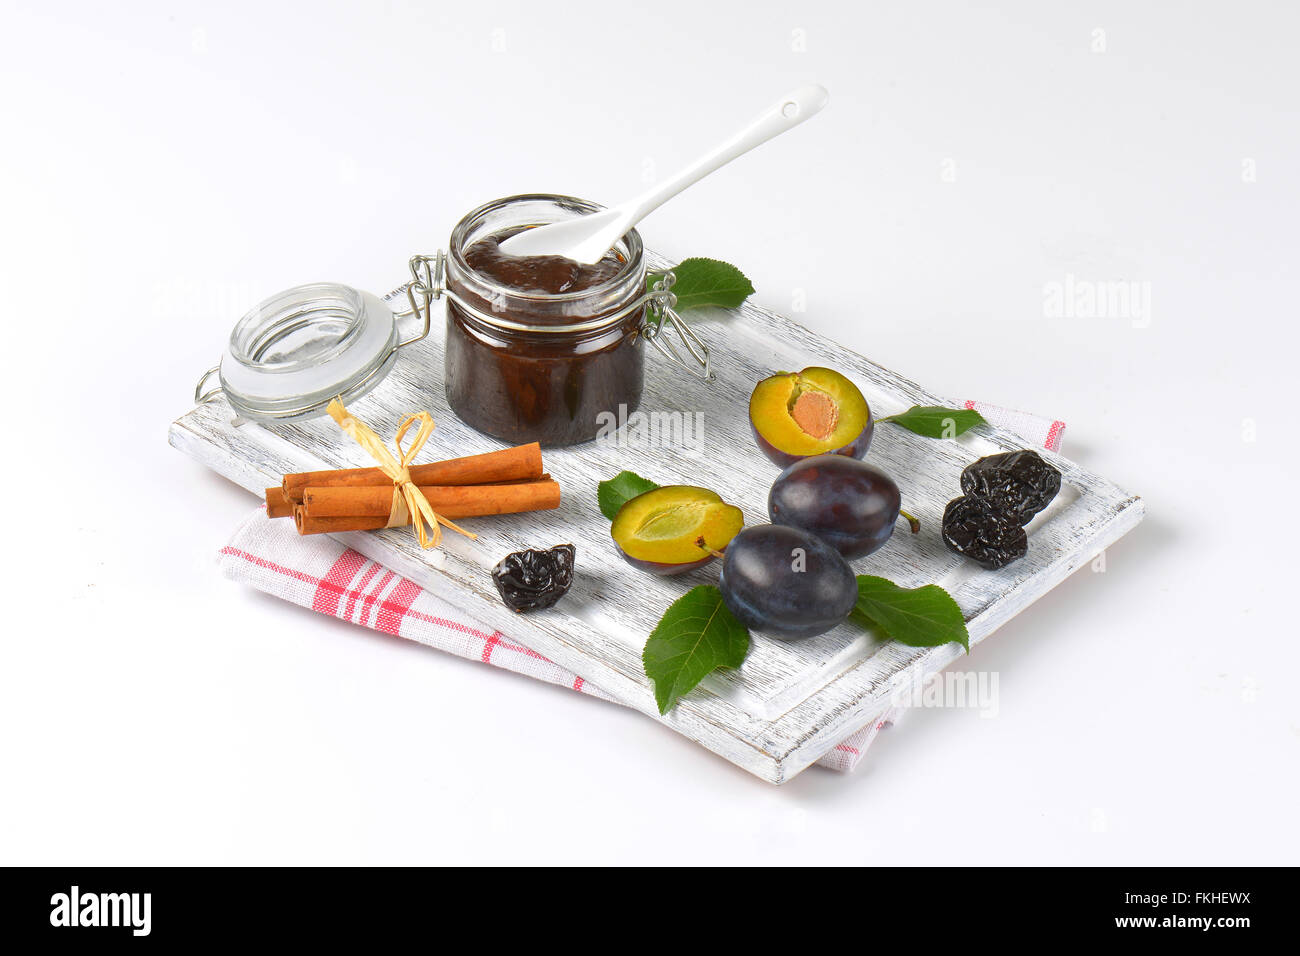 plum jam, cinnamon, fresh and dried plums on wooden cutting board Stock Photo